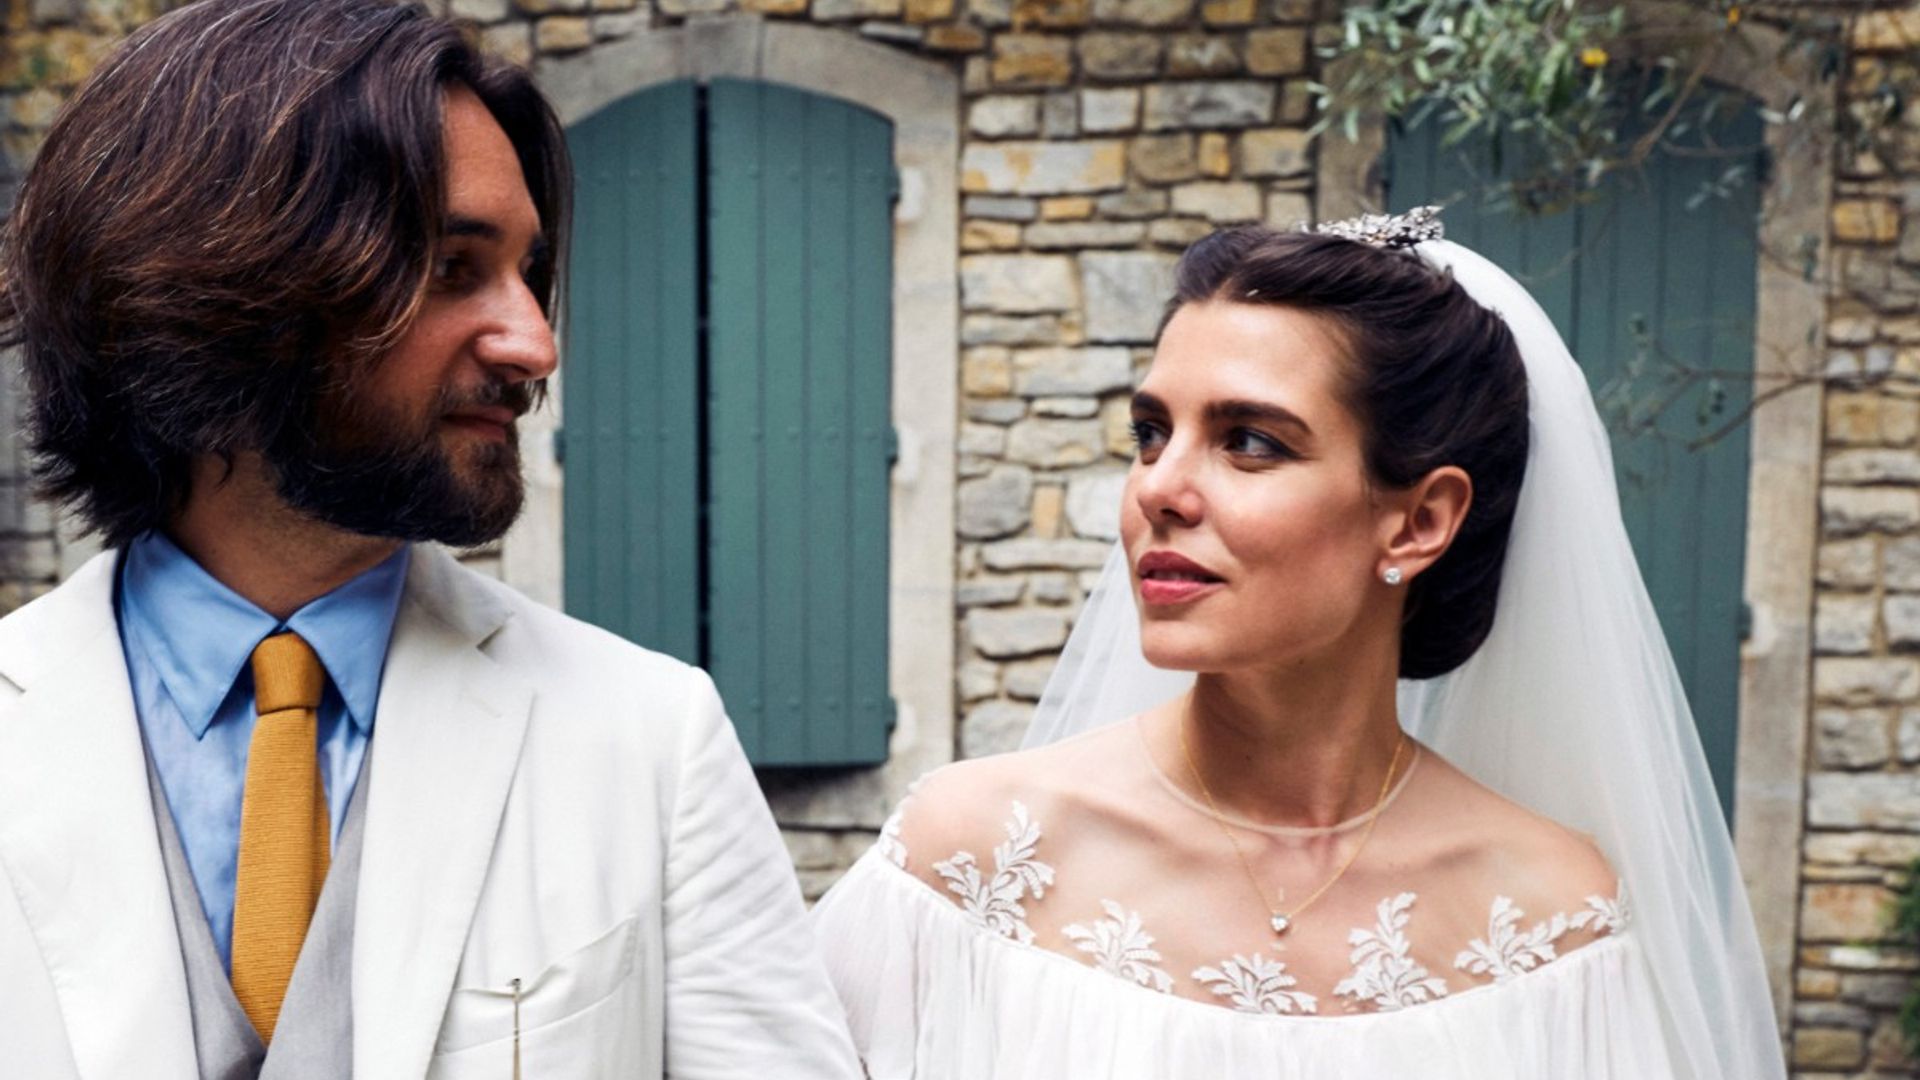 Grace Kelly's granddaughter Charlotte Casiraghi holds second wedding ceremony - see pics